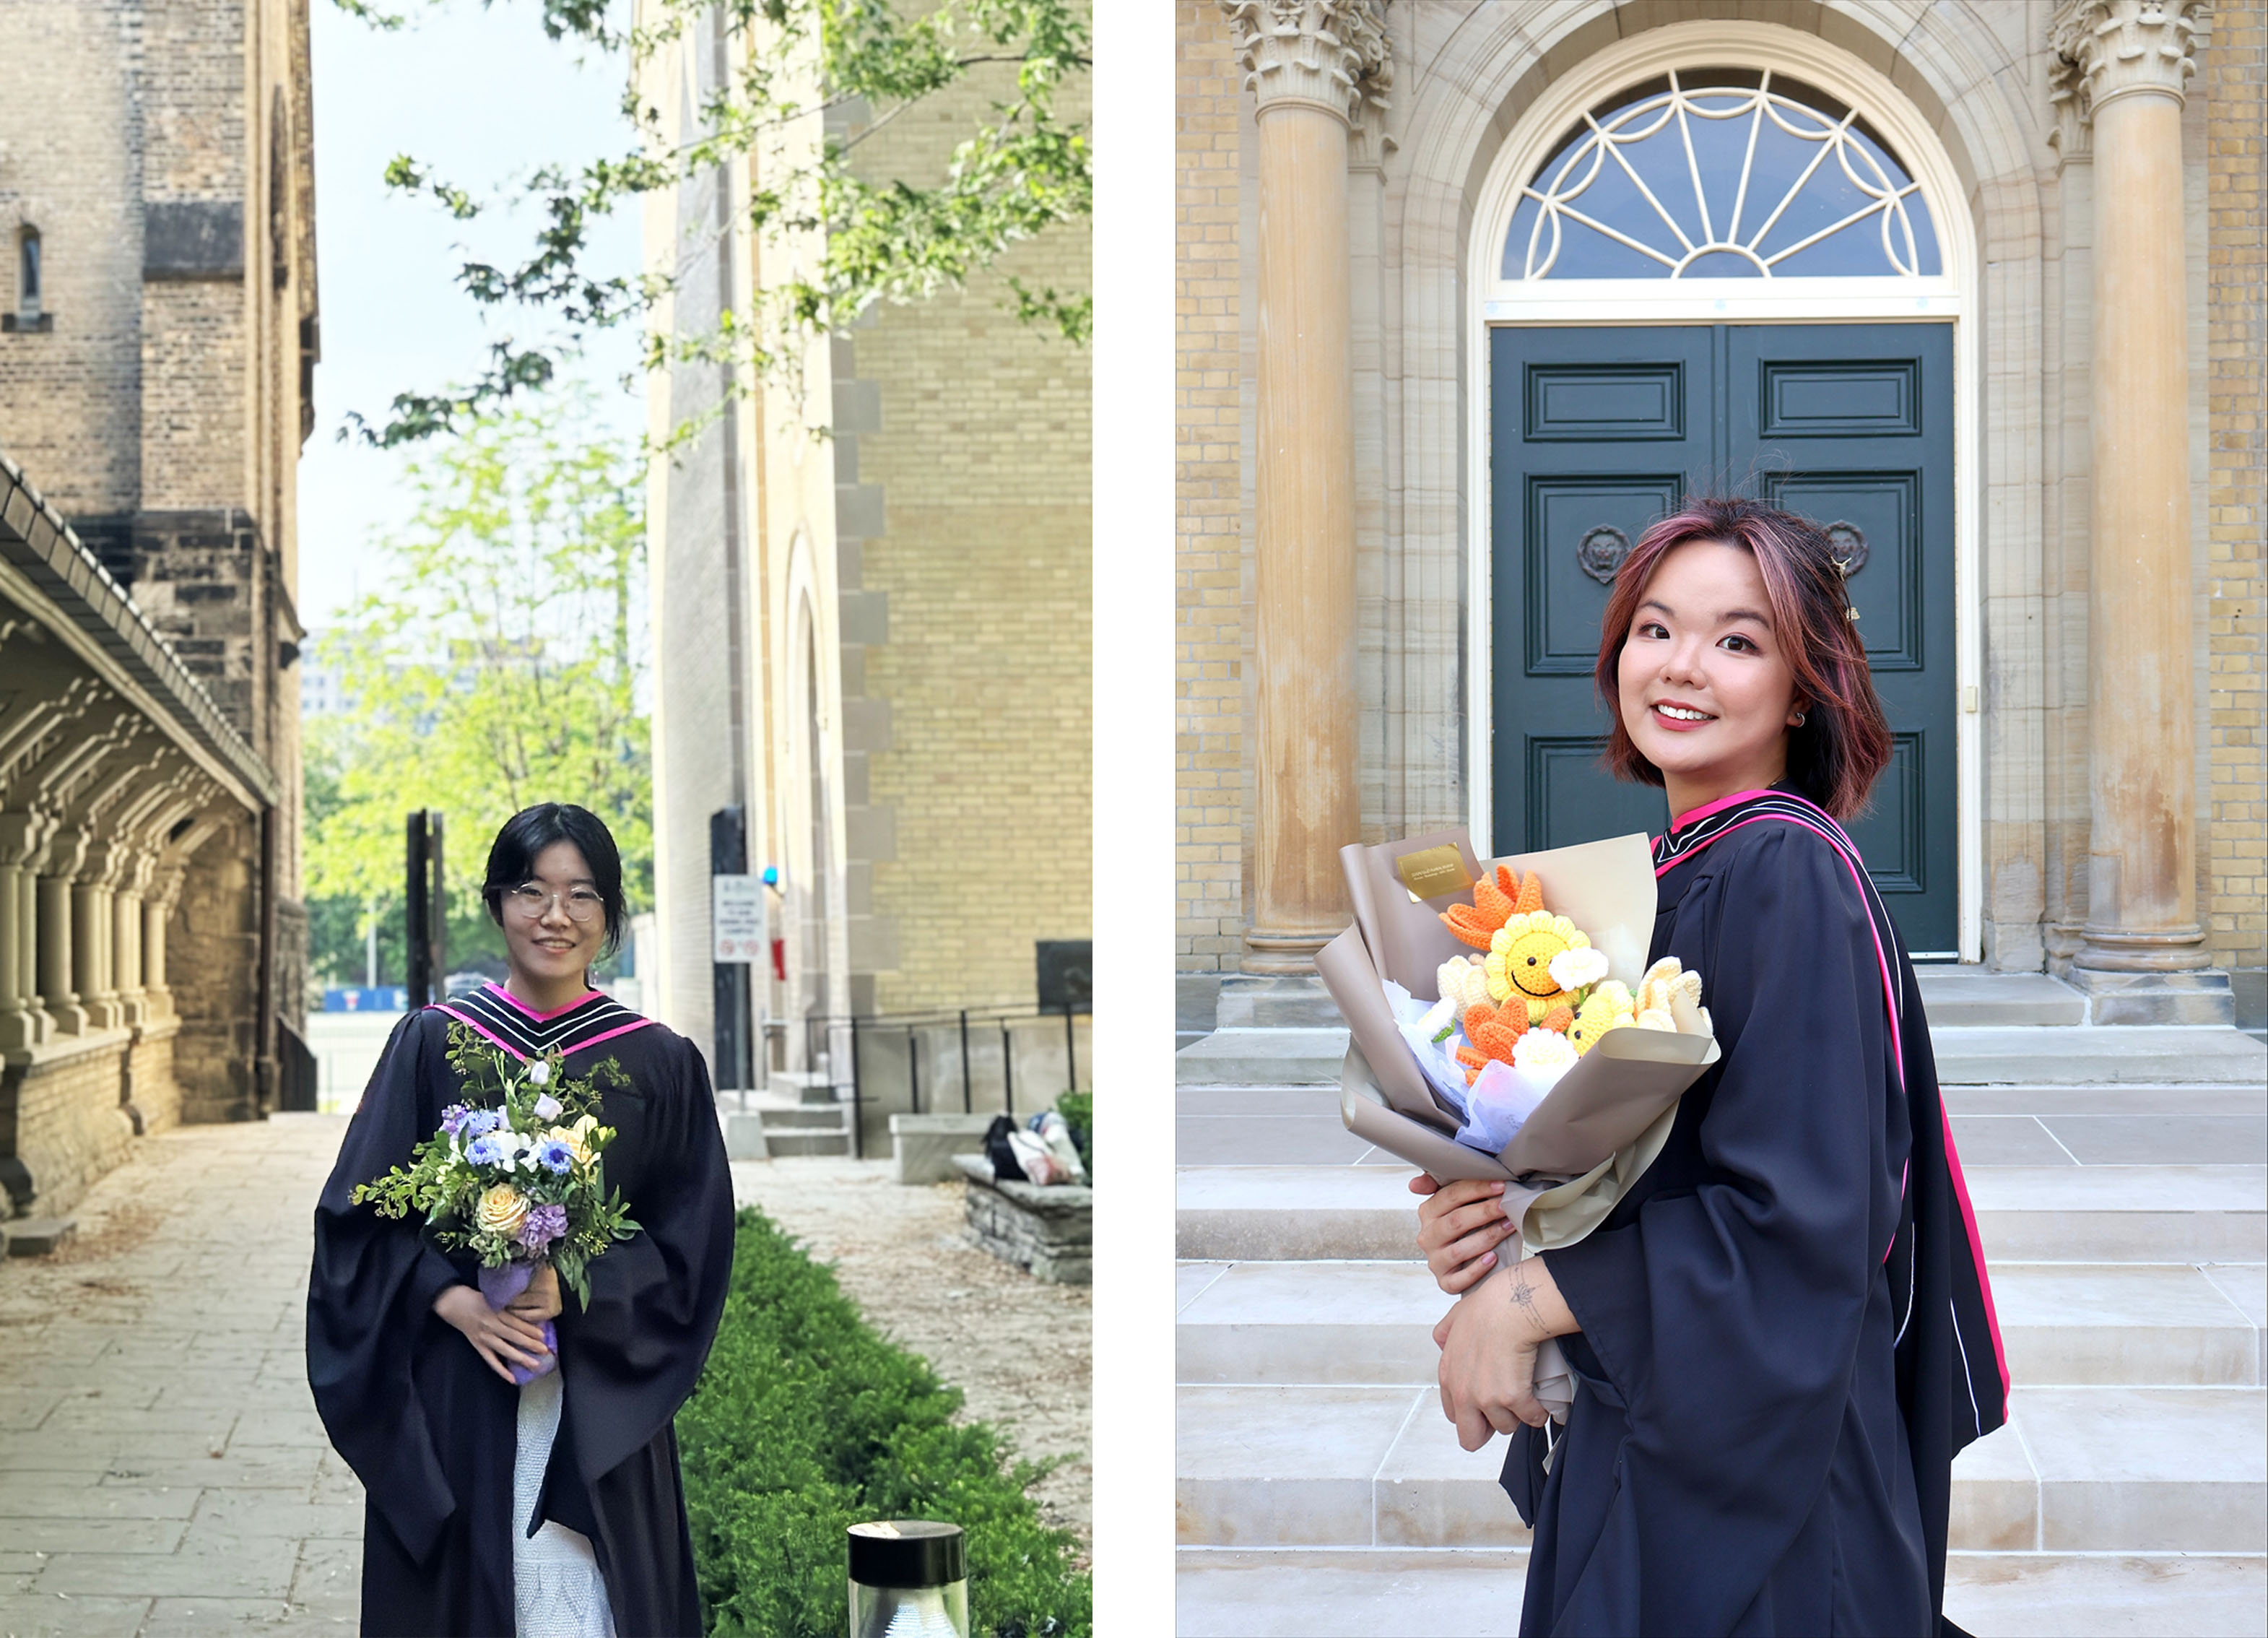 Yuan Zhou in a black graduation gown holding purple and white flowers, and Siyun Pan in a black gown holding orange flowers in front of a door